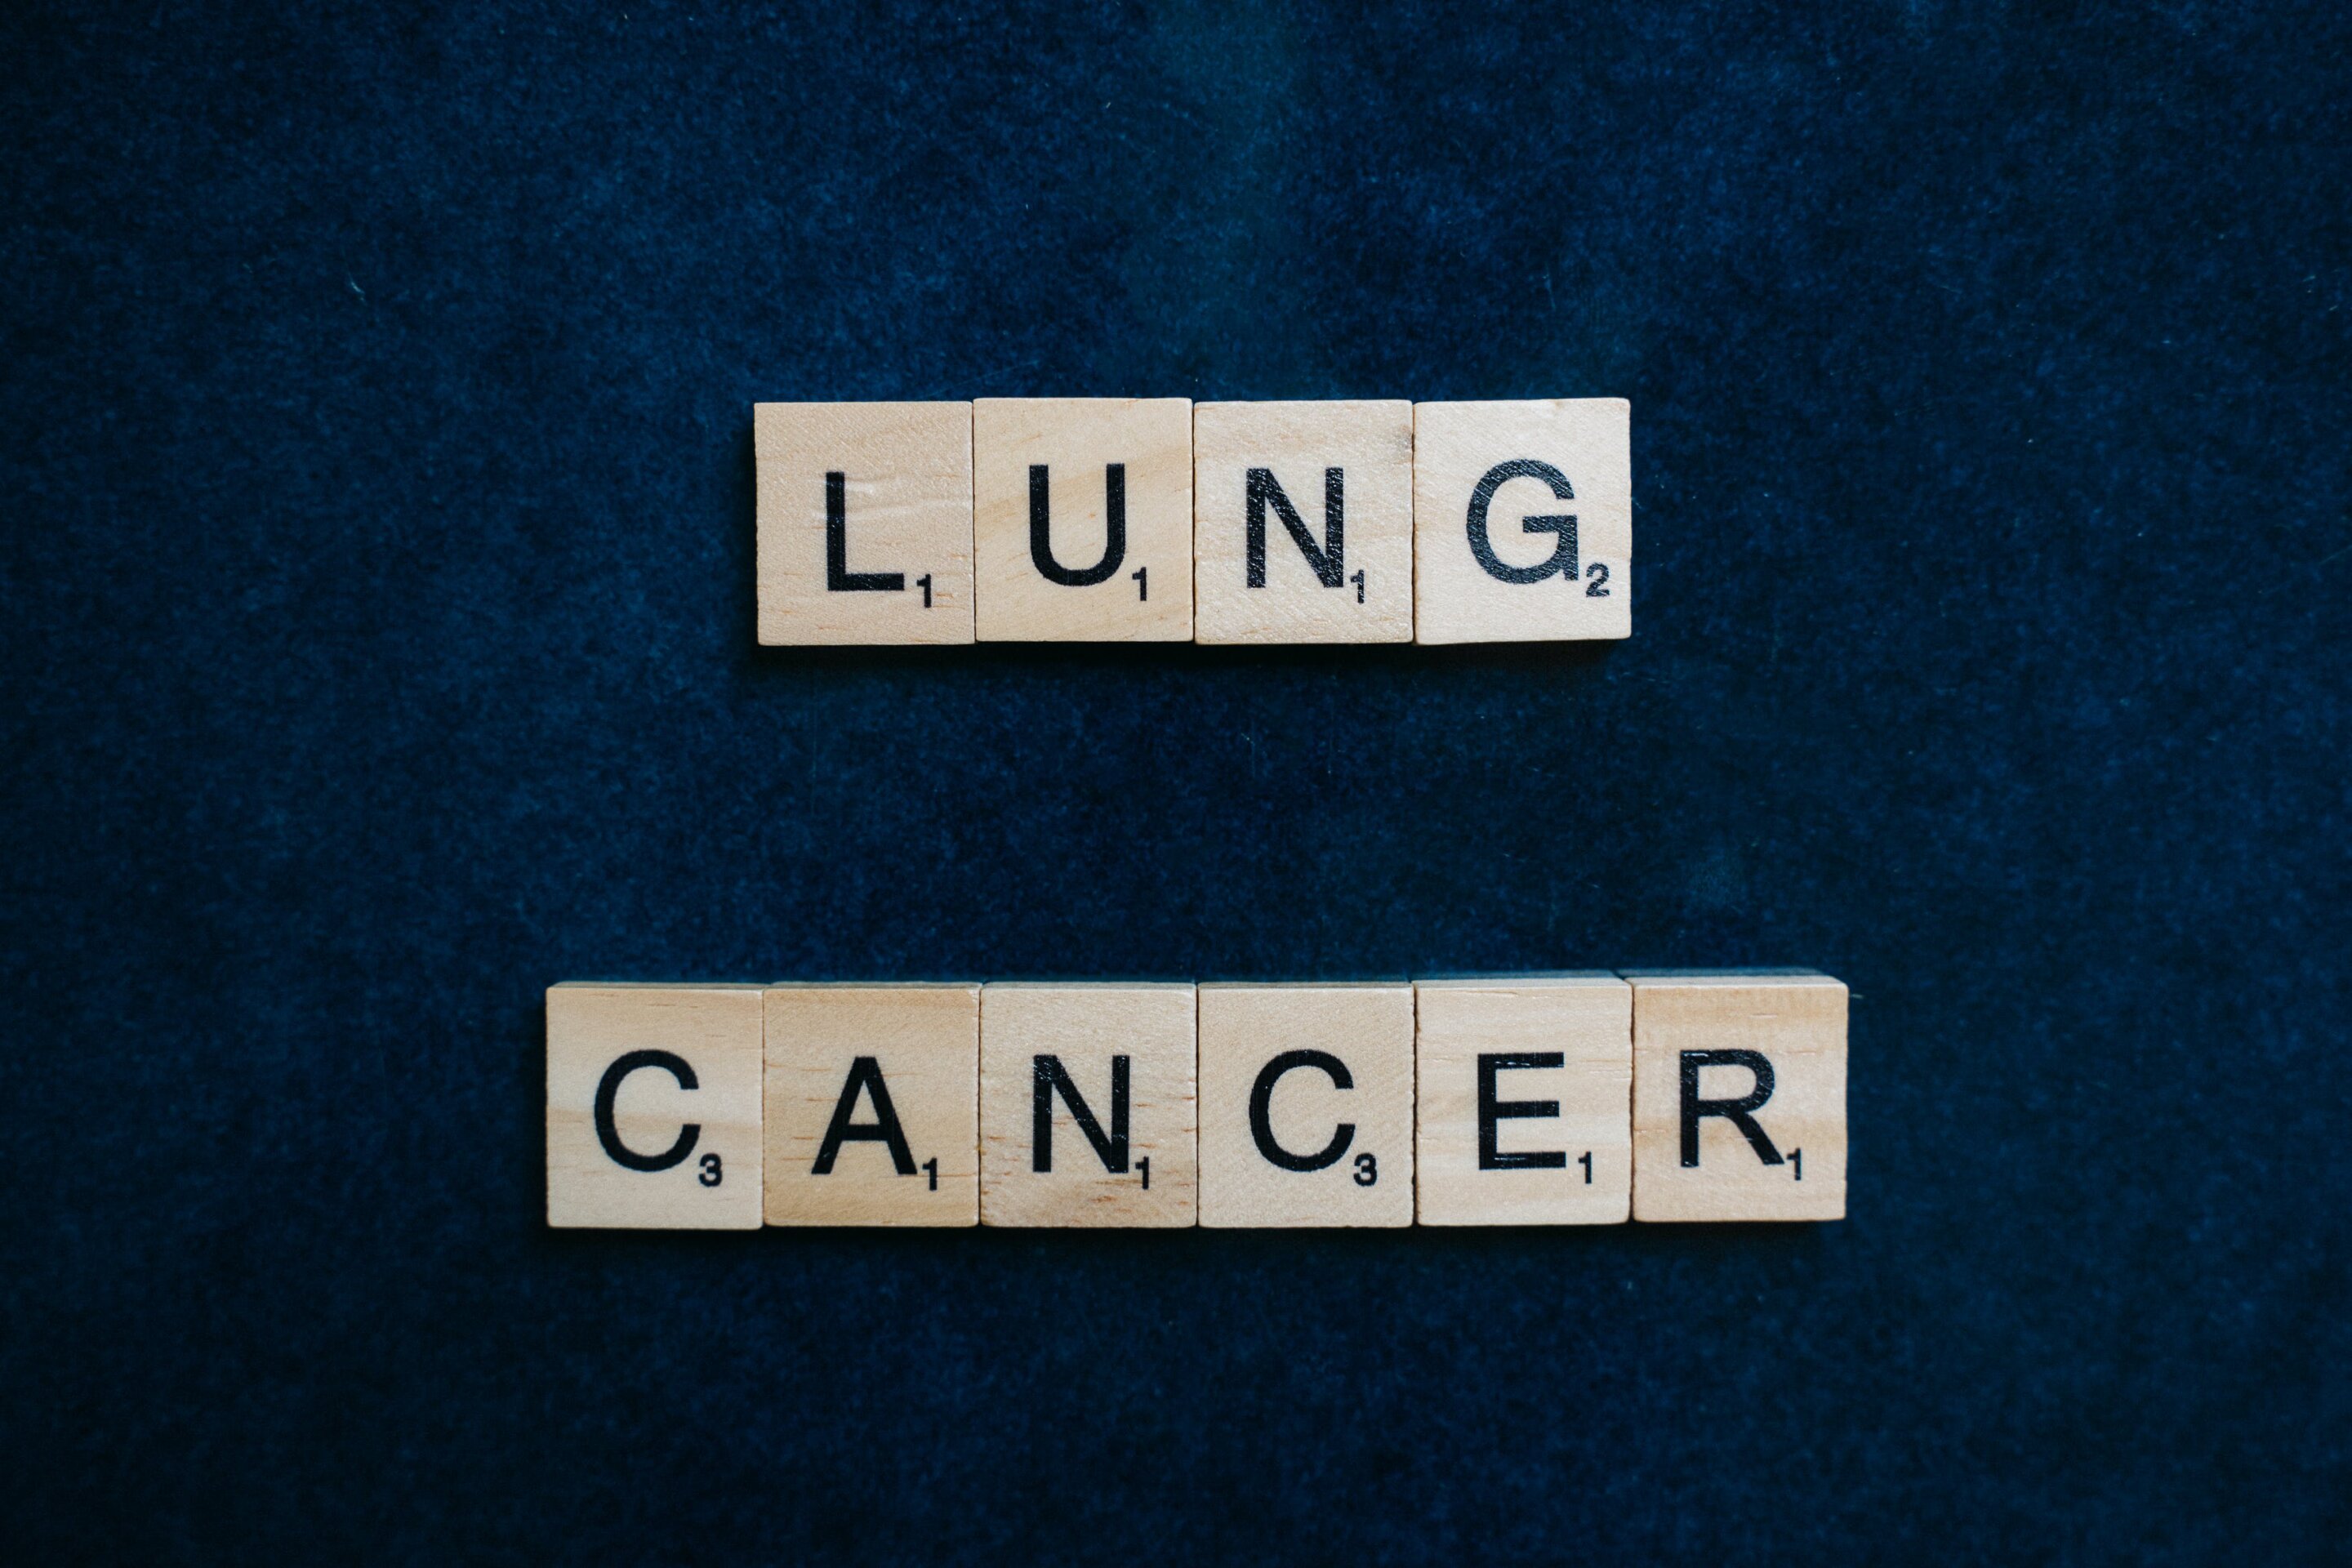 #Lung cancer screening found to prolong lives in real-world study